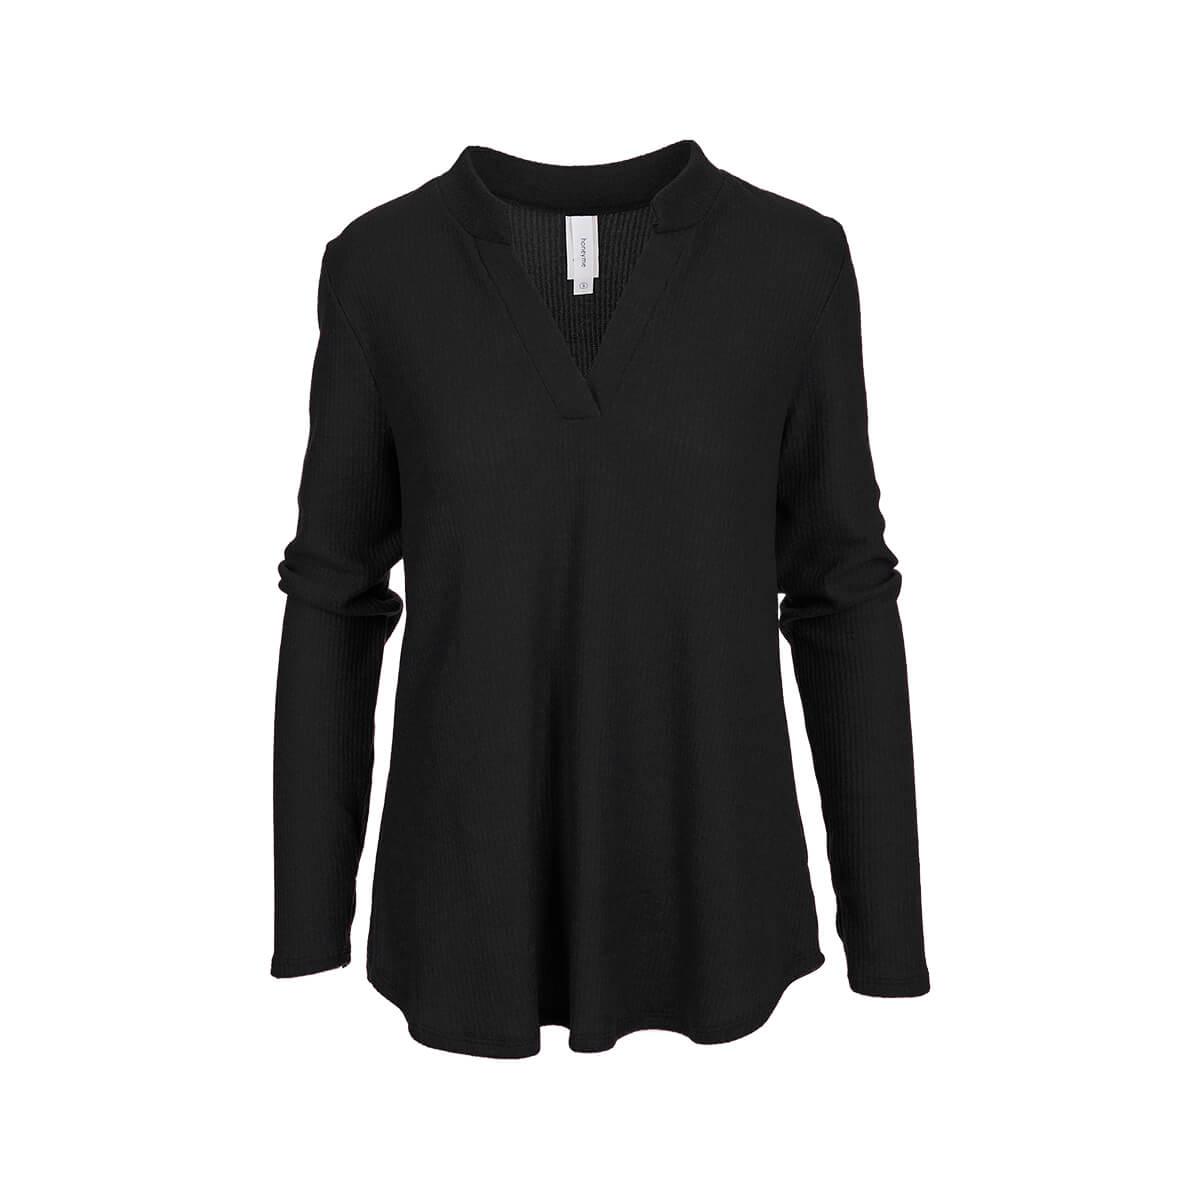  Women's Solid Ribbed Gabby Long Sleeve Top